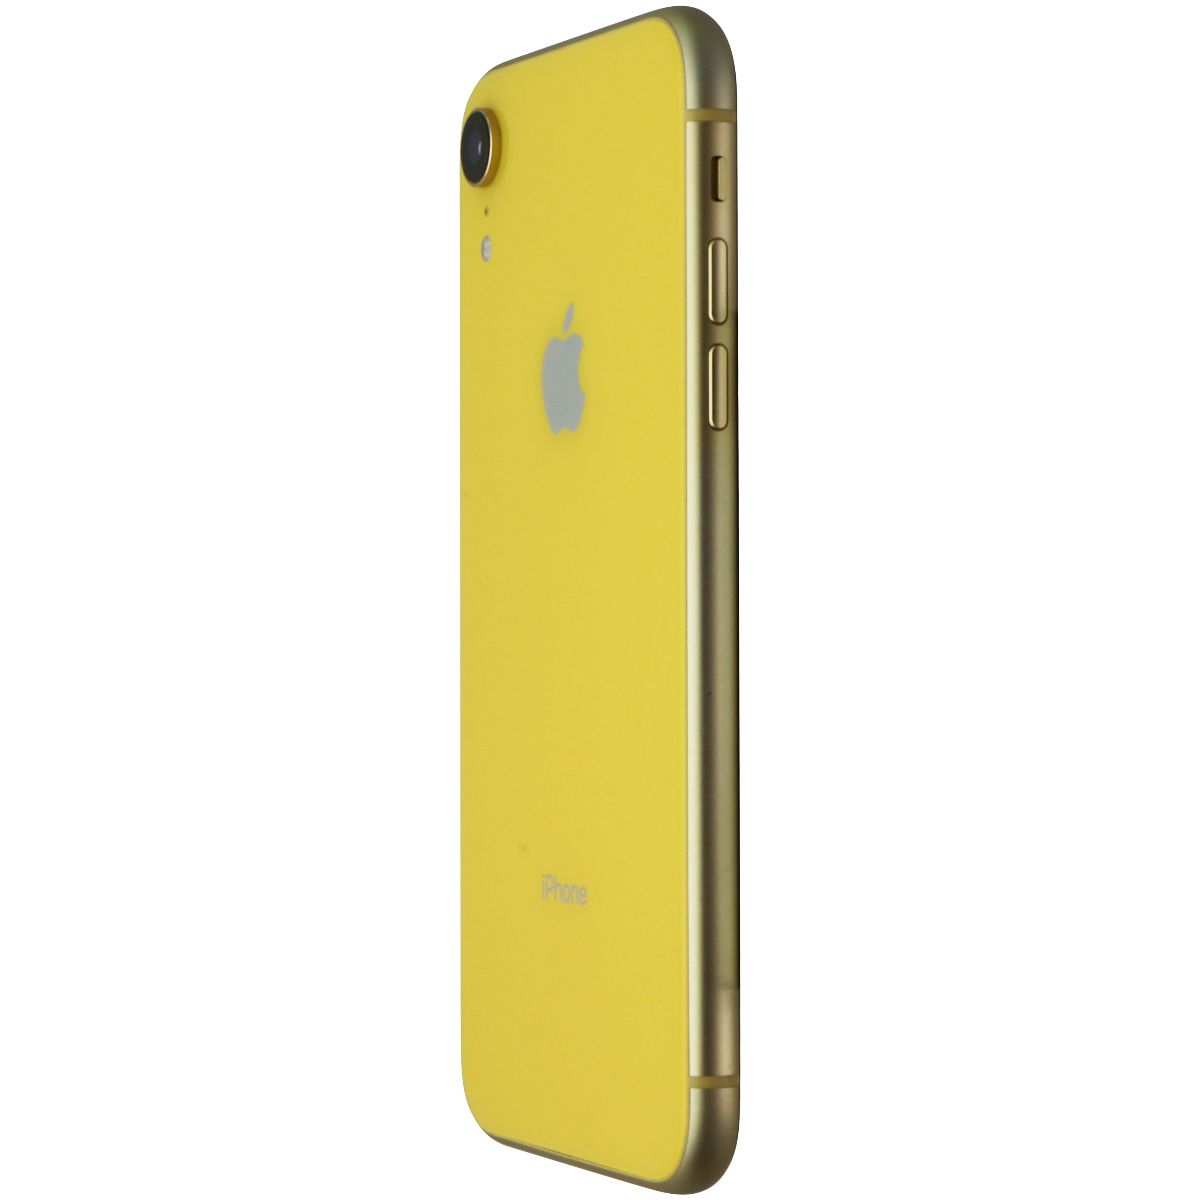 Apple iPhone XR (6.1-inch) (A1984) Unlocked - 64GB / Yellow - Bad Face ID* Cell Phones & Smartphones Apple    - Simple Cell Bulk Wholesale Pricing - USA Seller